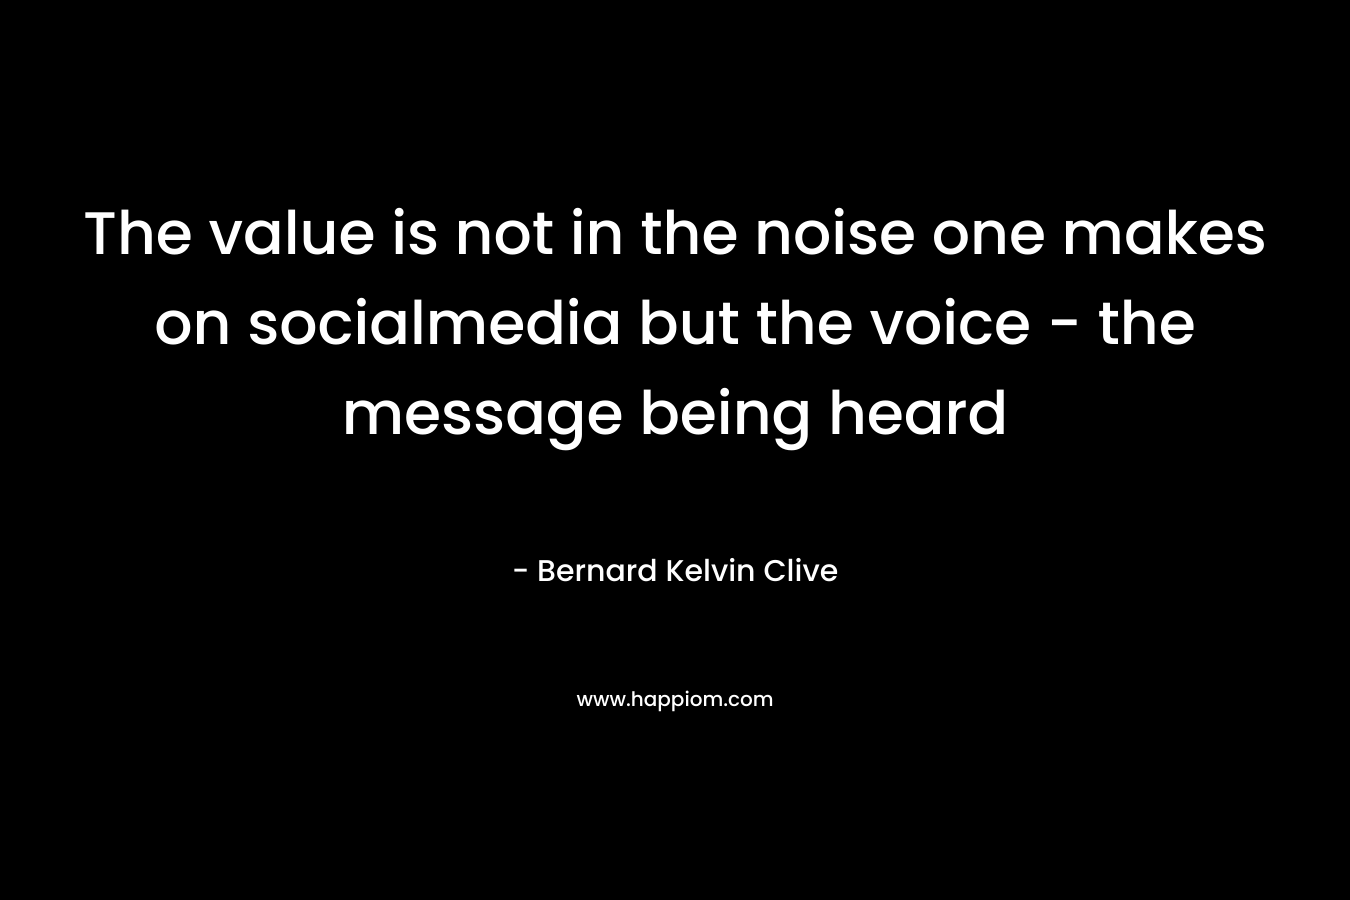 The value is not in the noise one makes on socialmedia but the voice - the message being heard